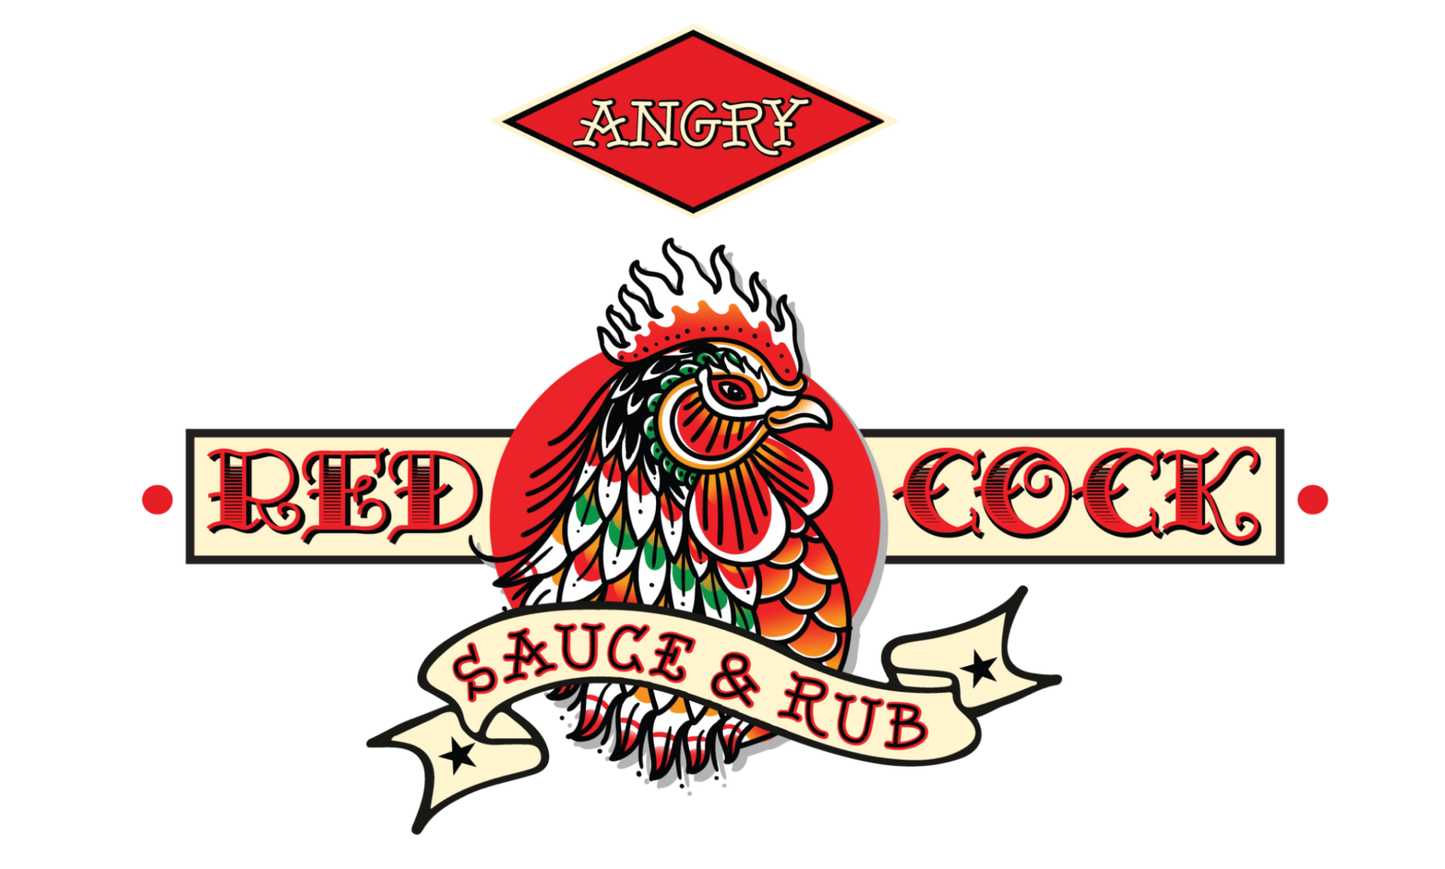 Angry Red Cock Sauce & Rub Logo Handcrafted in the U.S.A.